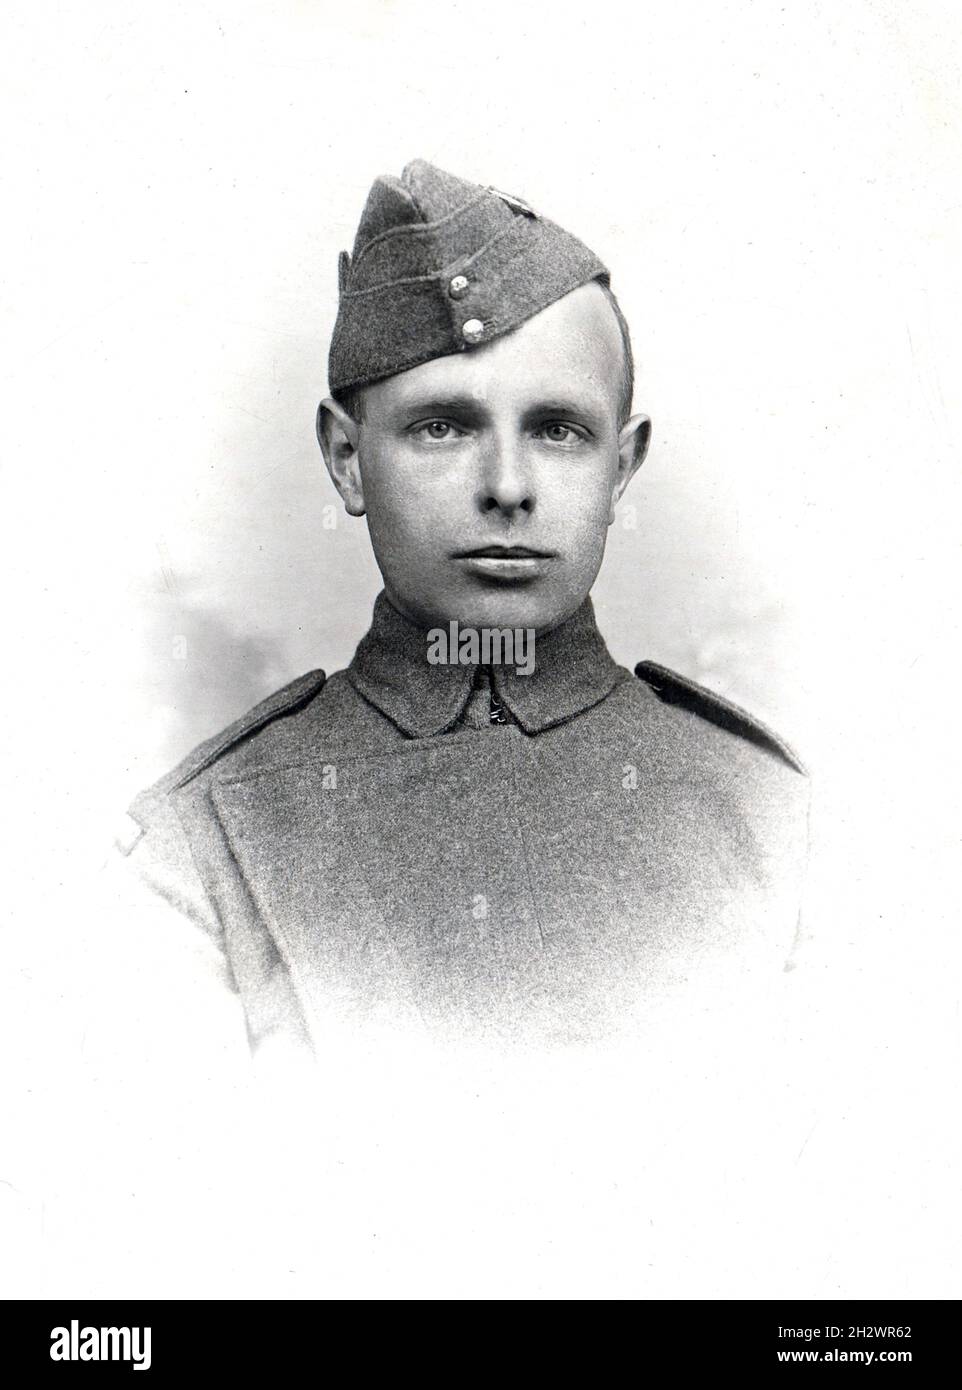 An antique black & white portrait photograph of a First World War Royal Flying Corps serviceman in uniform. He is wearing an RFC side cap and tunic, which due to its unique design was known as the ‘maternity’ pattern. Stock Photo